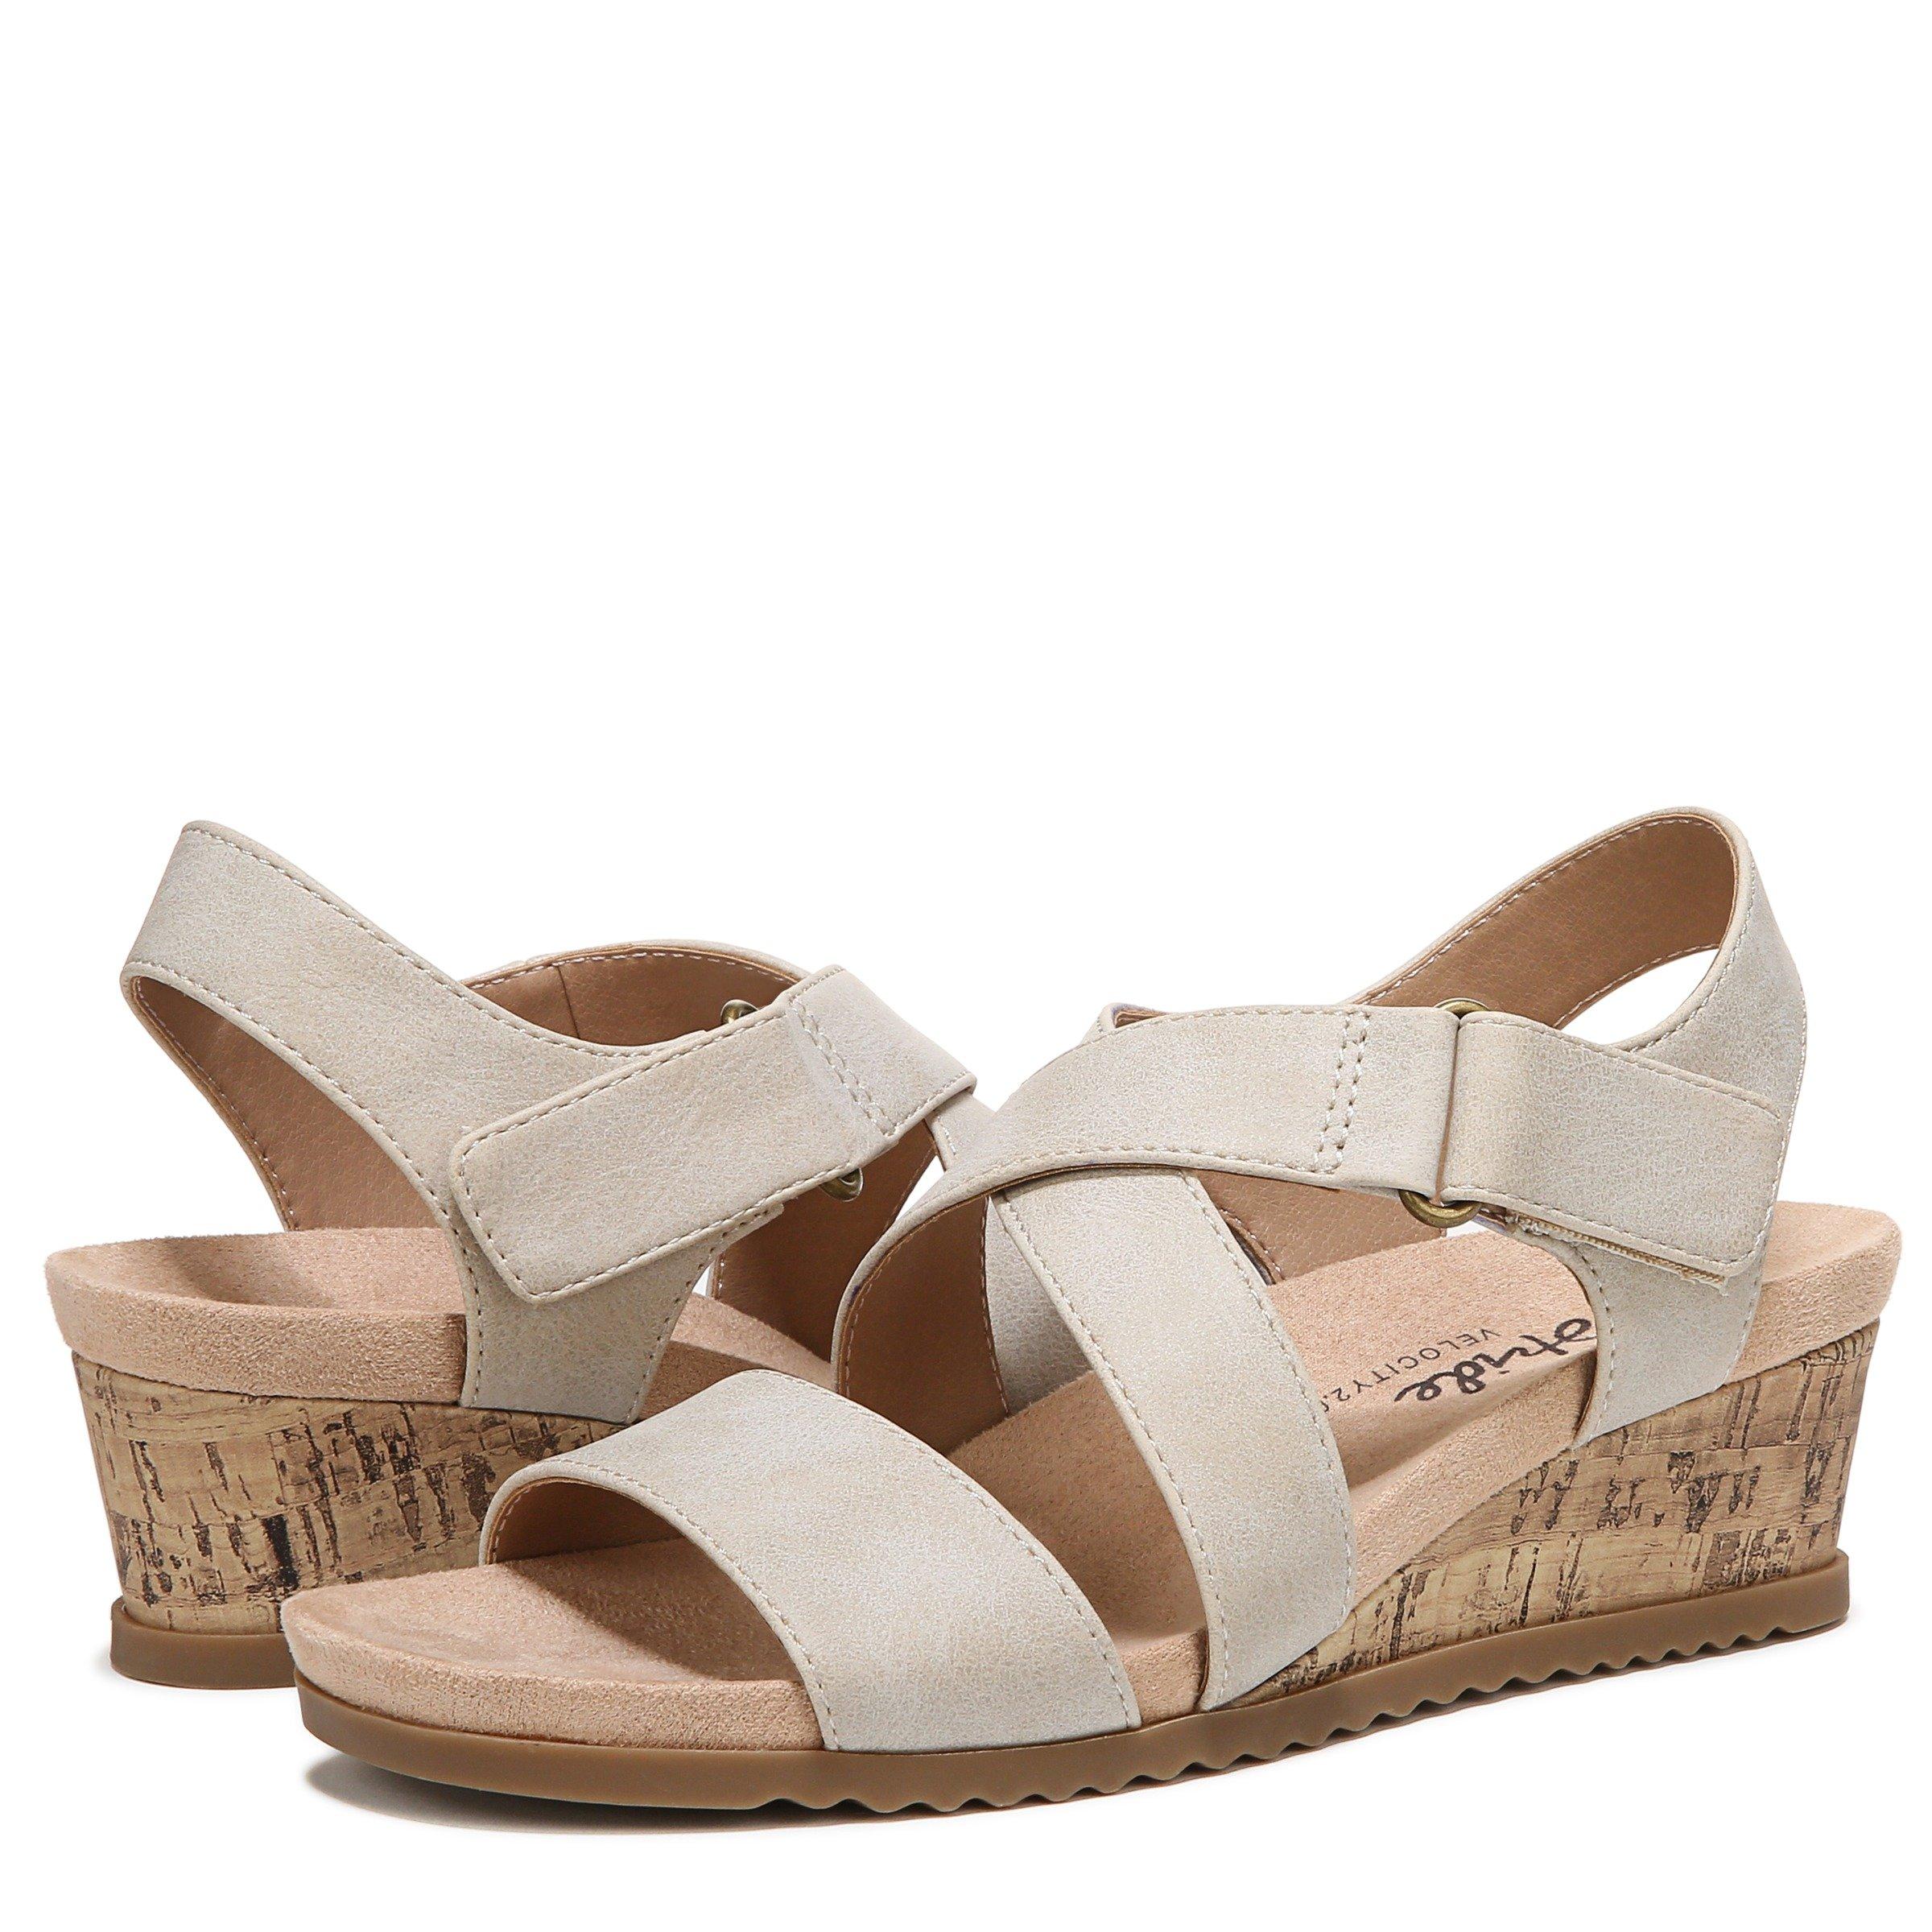 Womens Sincere Wedge